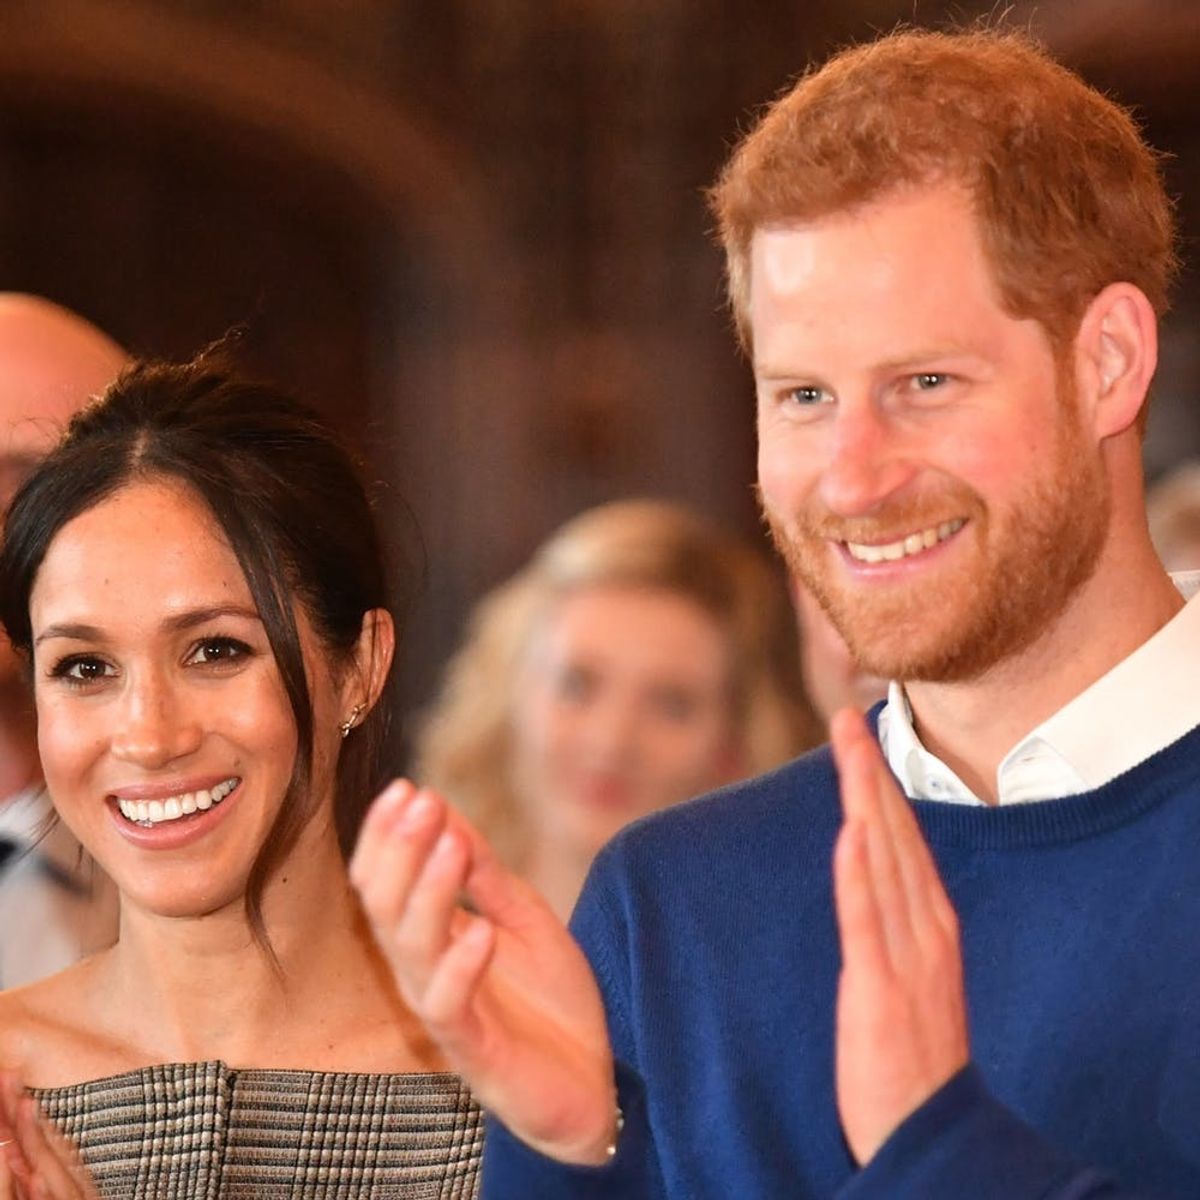 Prince Harry and Meghan Markle’s Latest Date Night Included a Trip to the Theatre to See ‘Hamilton’